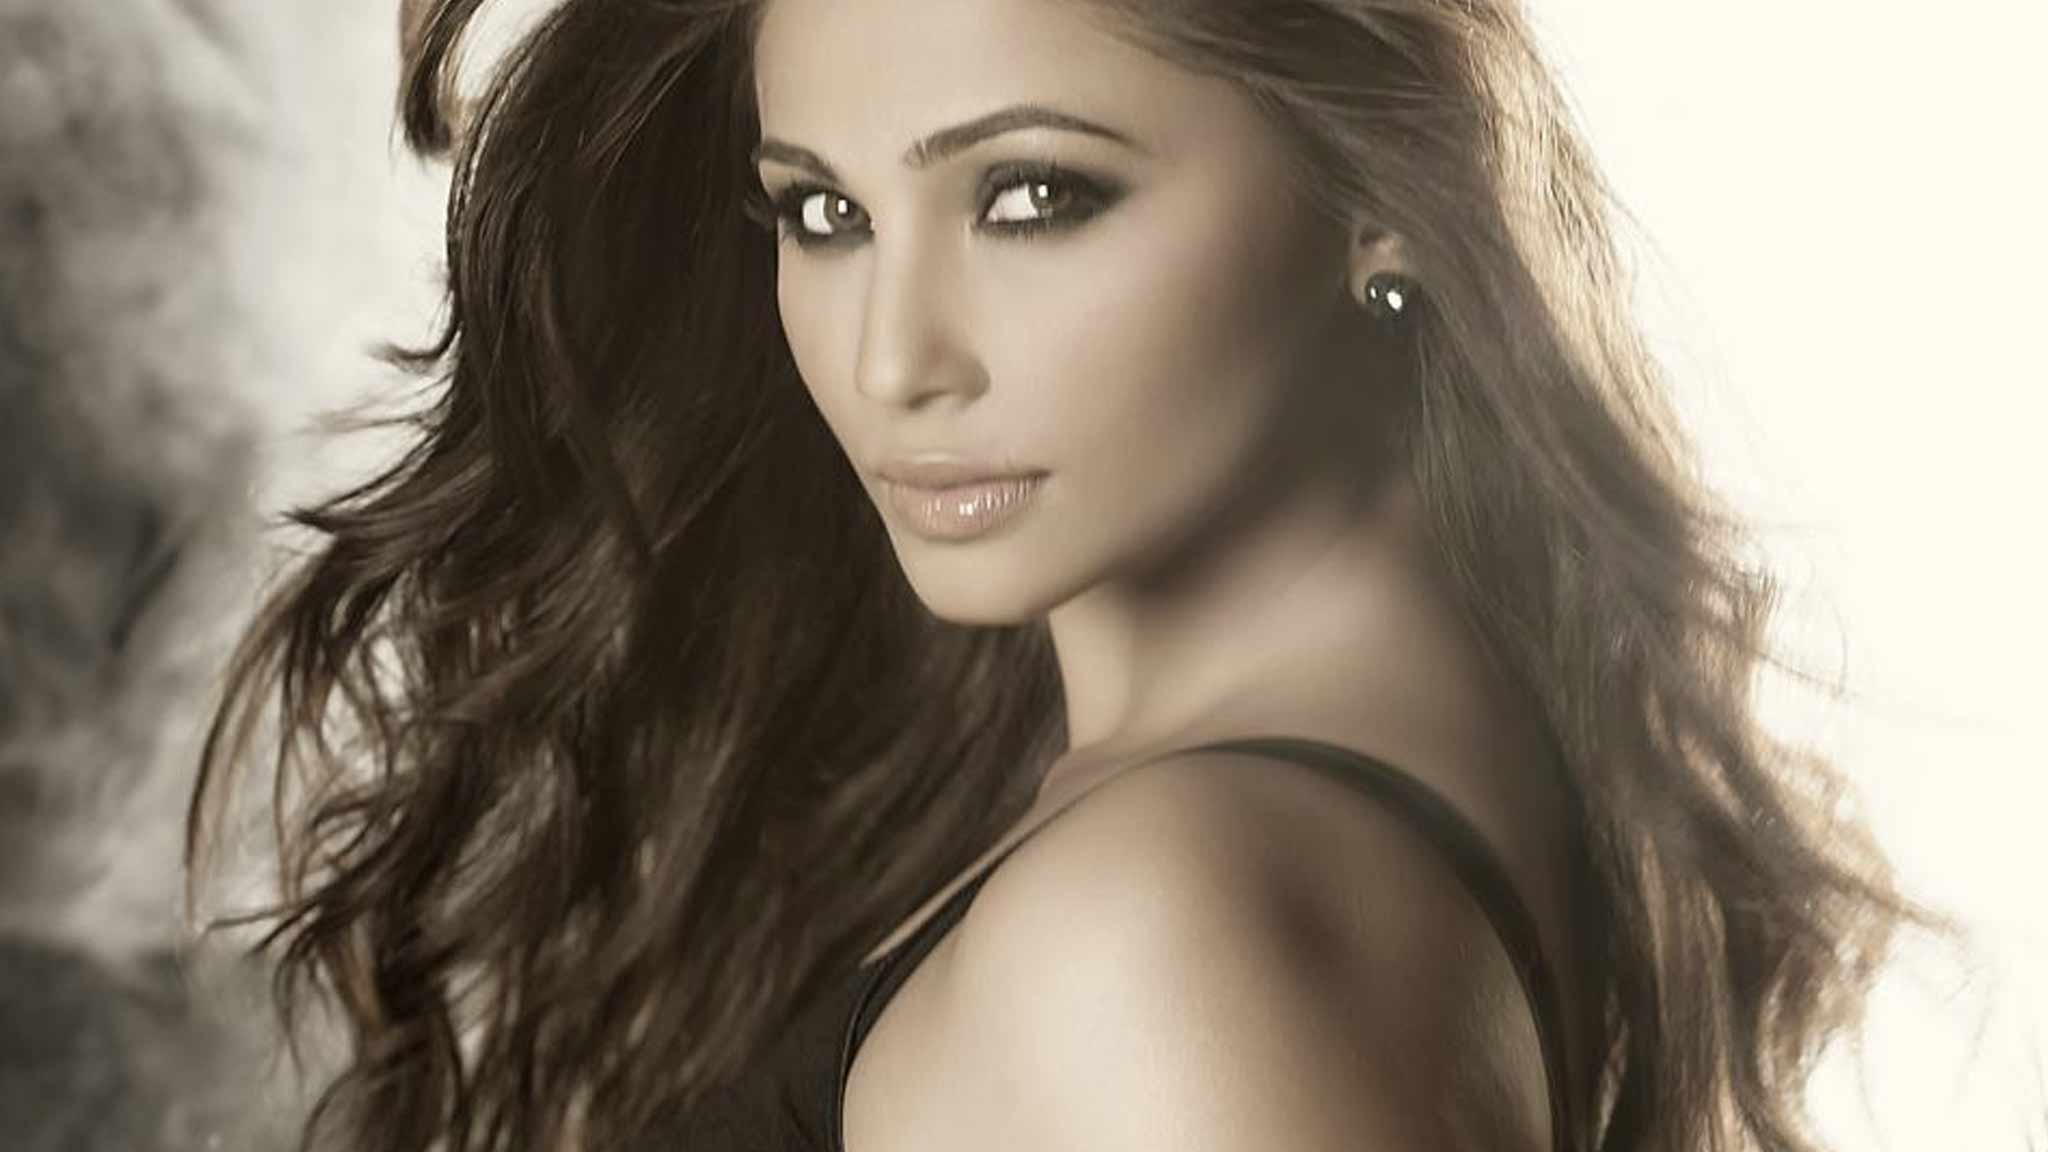 Race 3 Star Daisy Shah’s Instagram Posts Are Winning Our Hearts